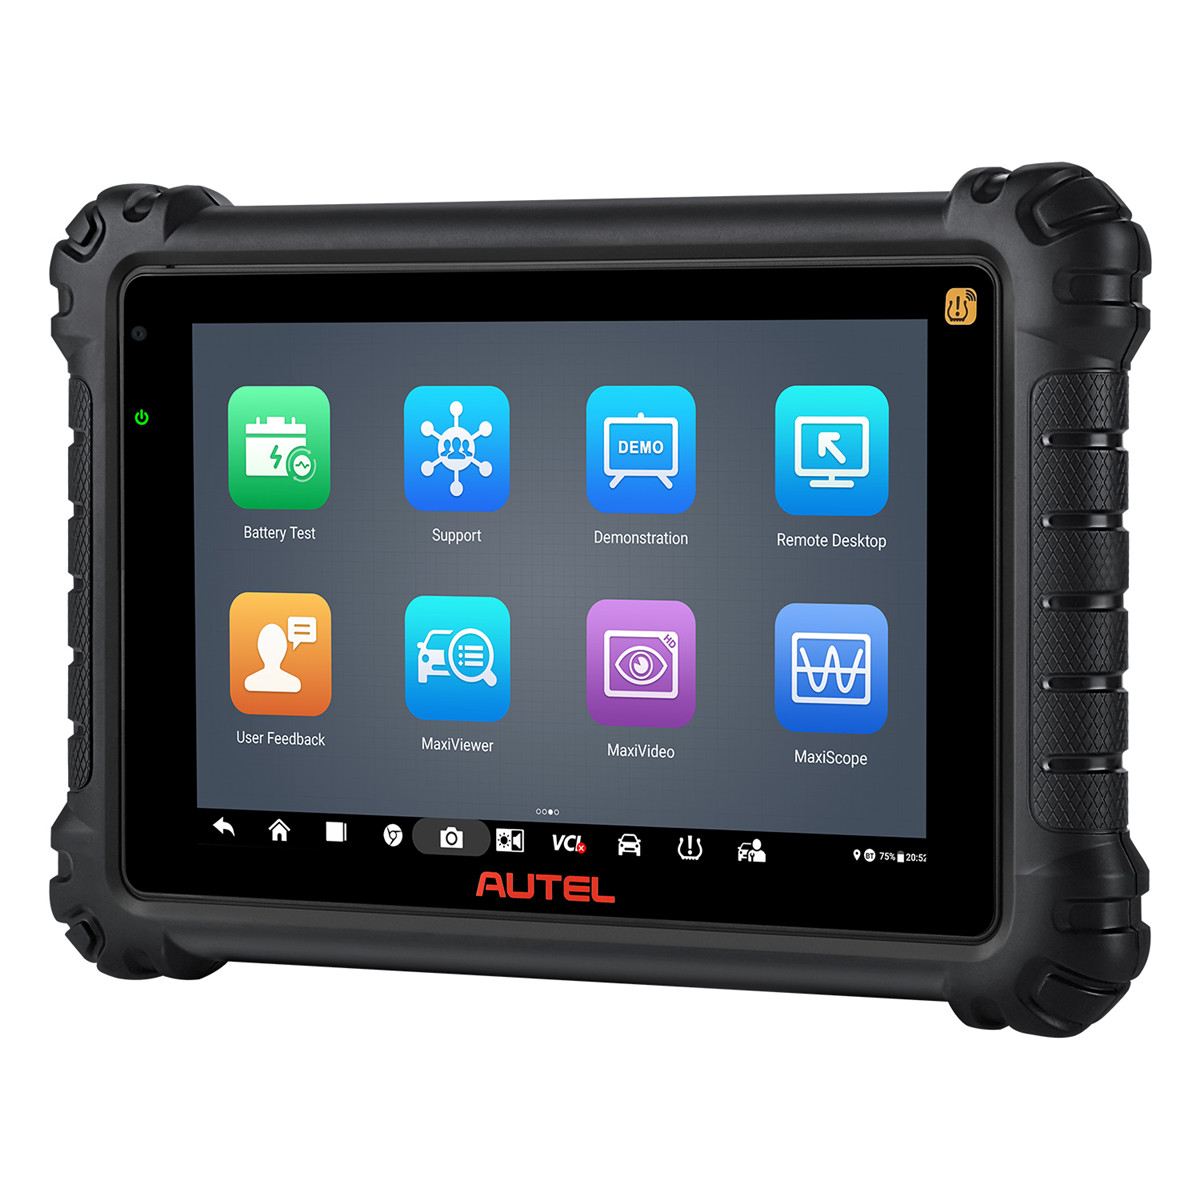 2023 Autel MaxiSYS MS906 Pro-TS Full Systems Diagnostic with Complete TPMS  Sensor Programming